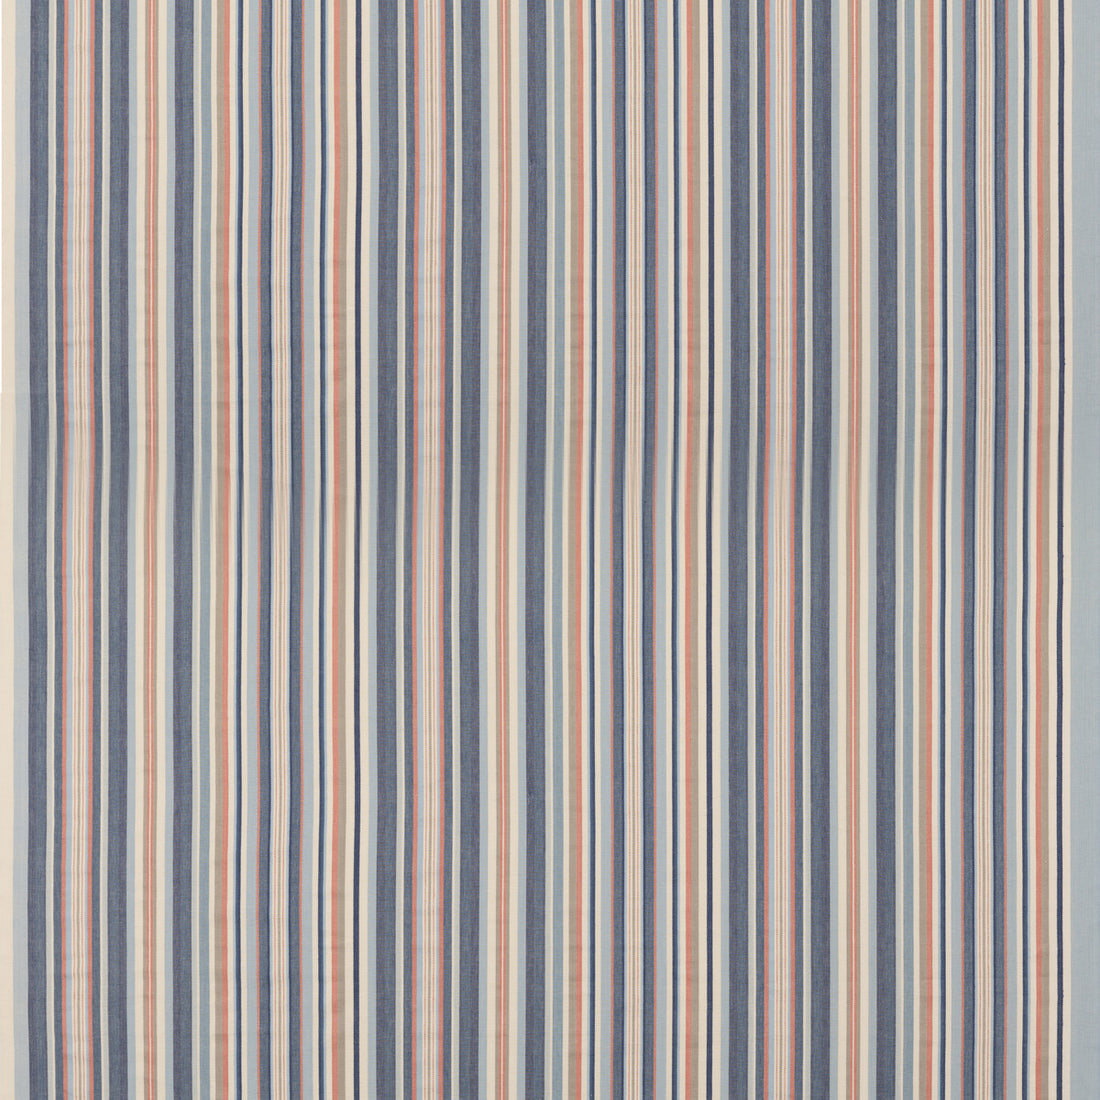 Medford Stripe fabric in blue/rust color - pattern FD823.G103.0 - by Mulberry in the Westerly Stripes collection